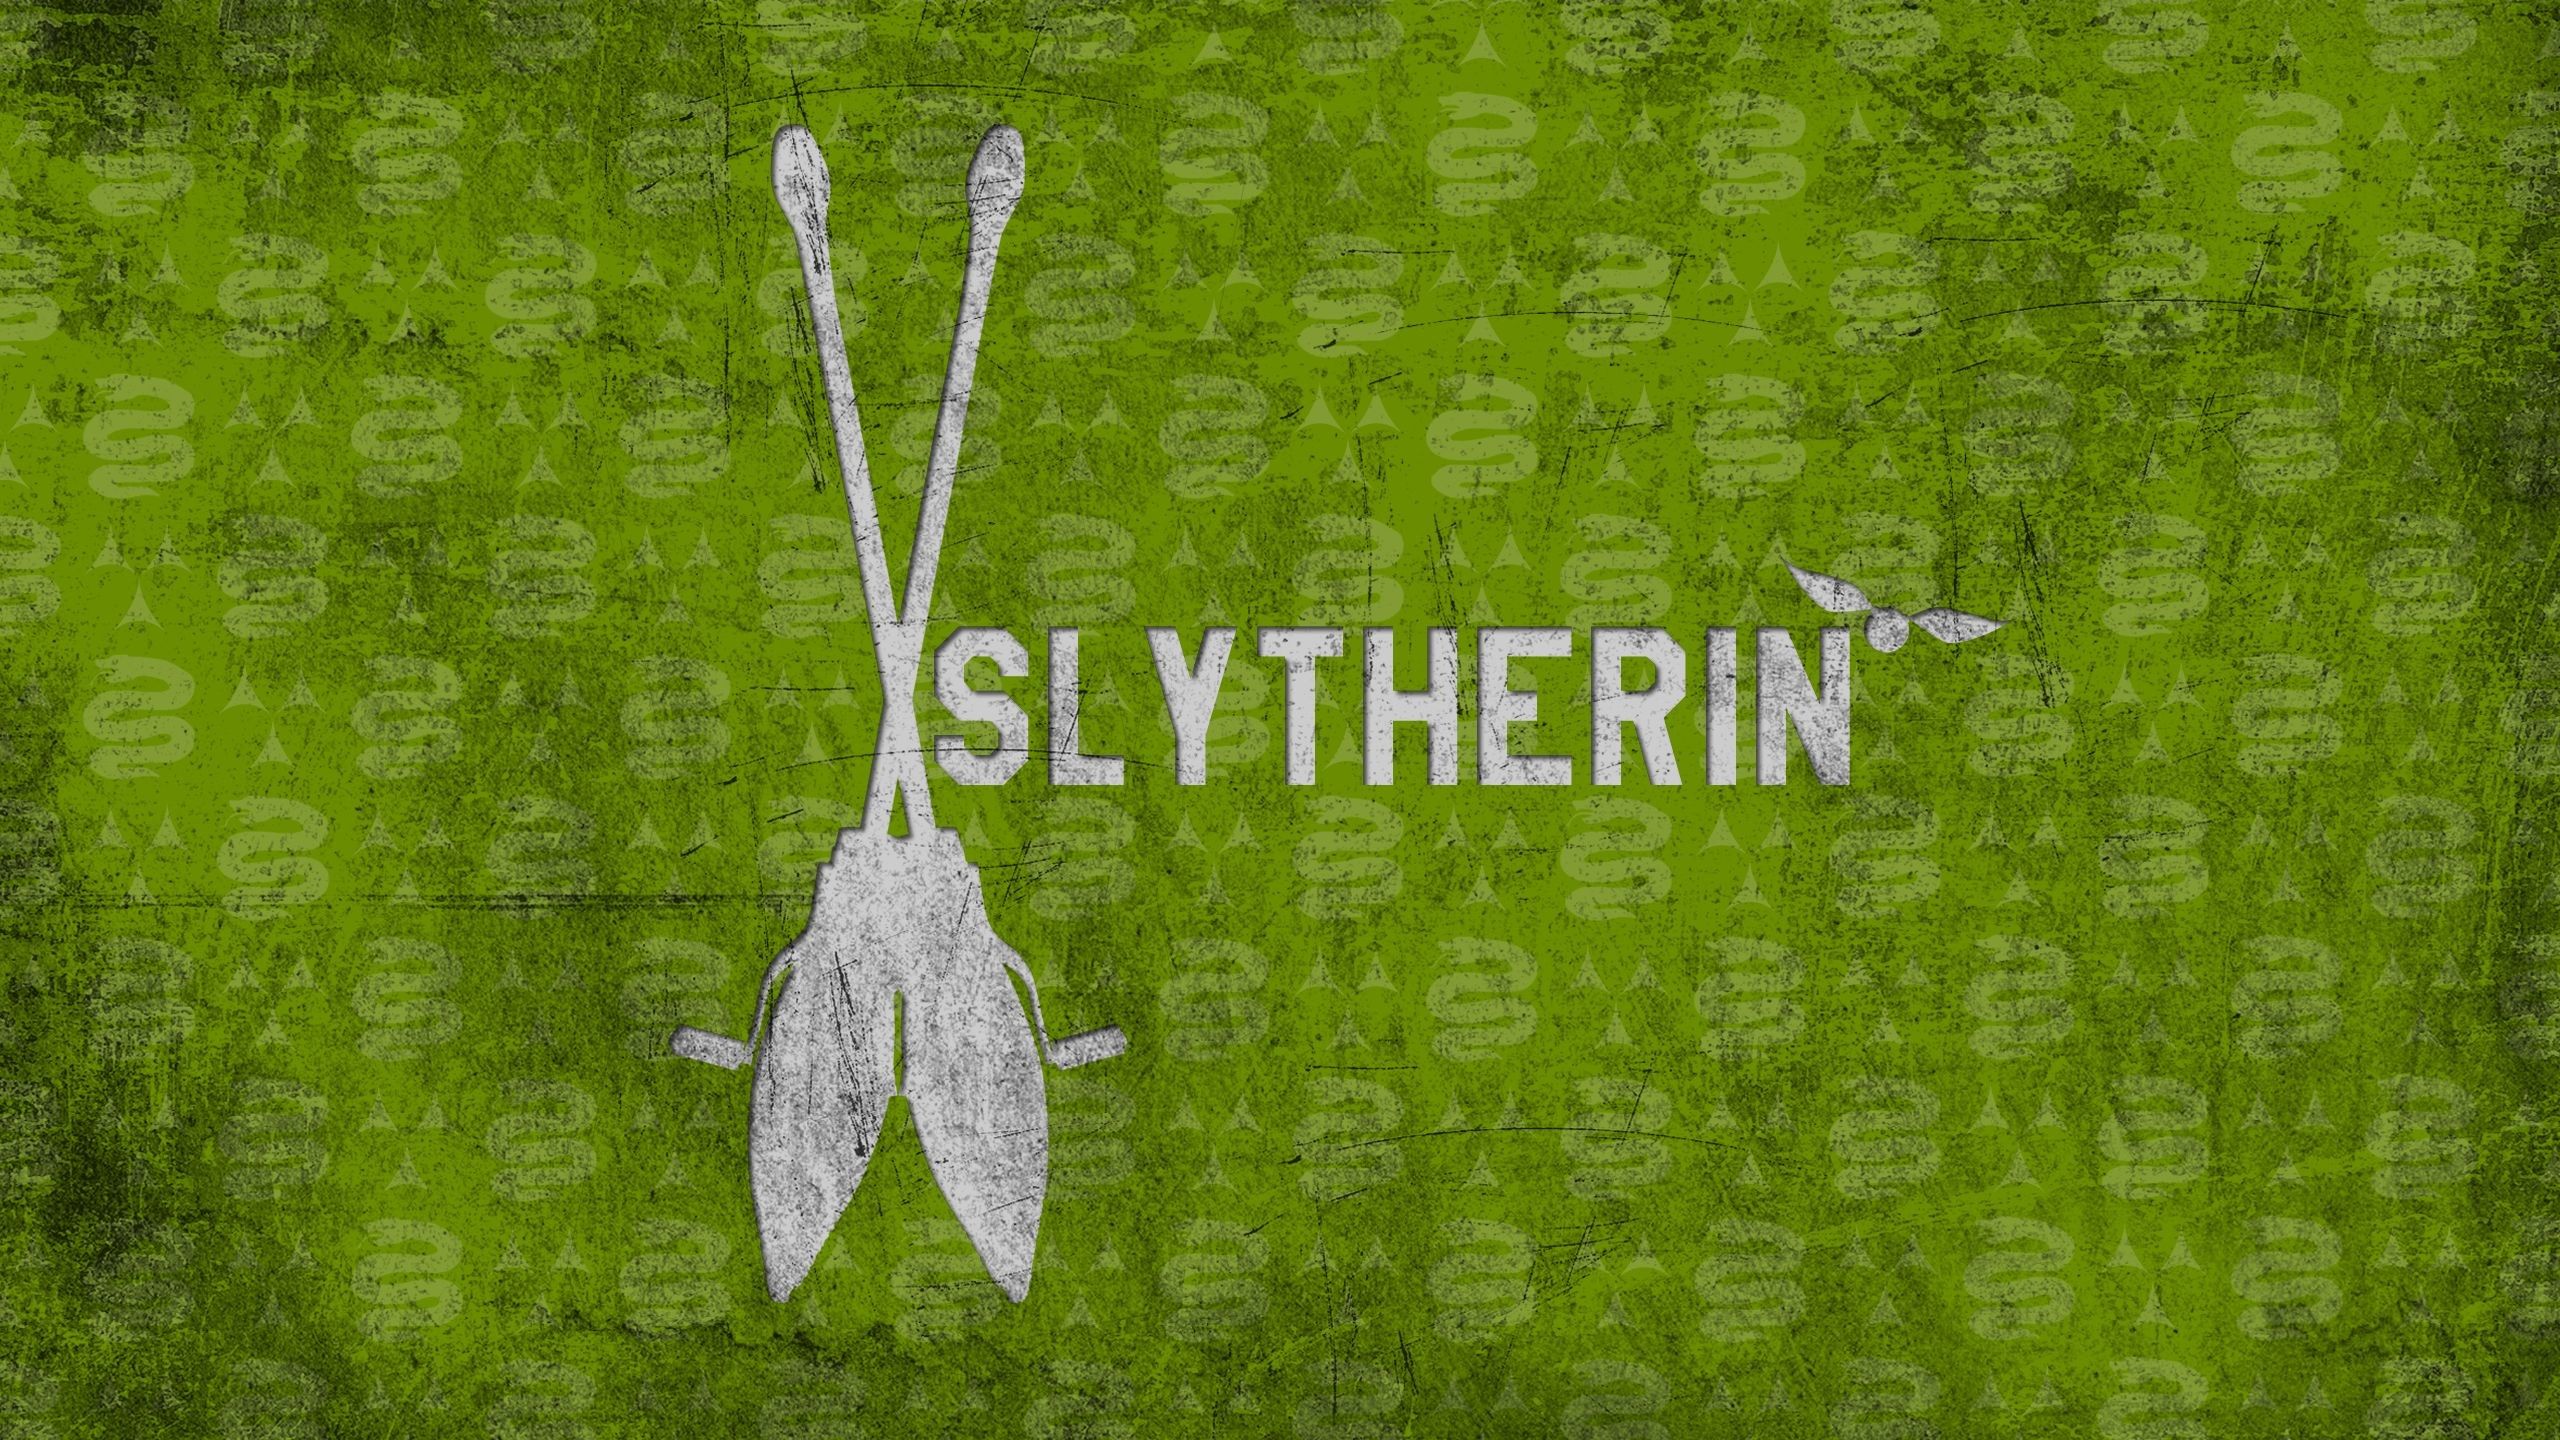 The Harry Potter logo for the house of Slytherin. - Slytherin